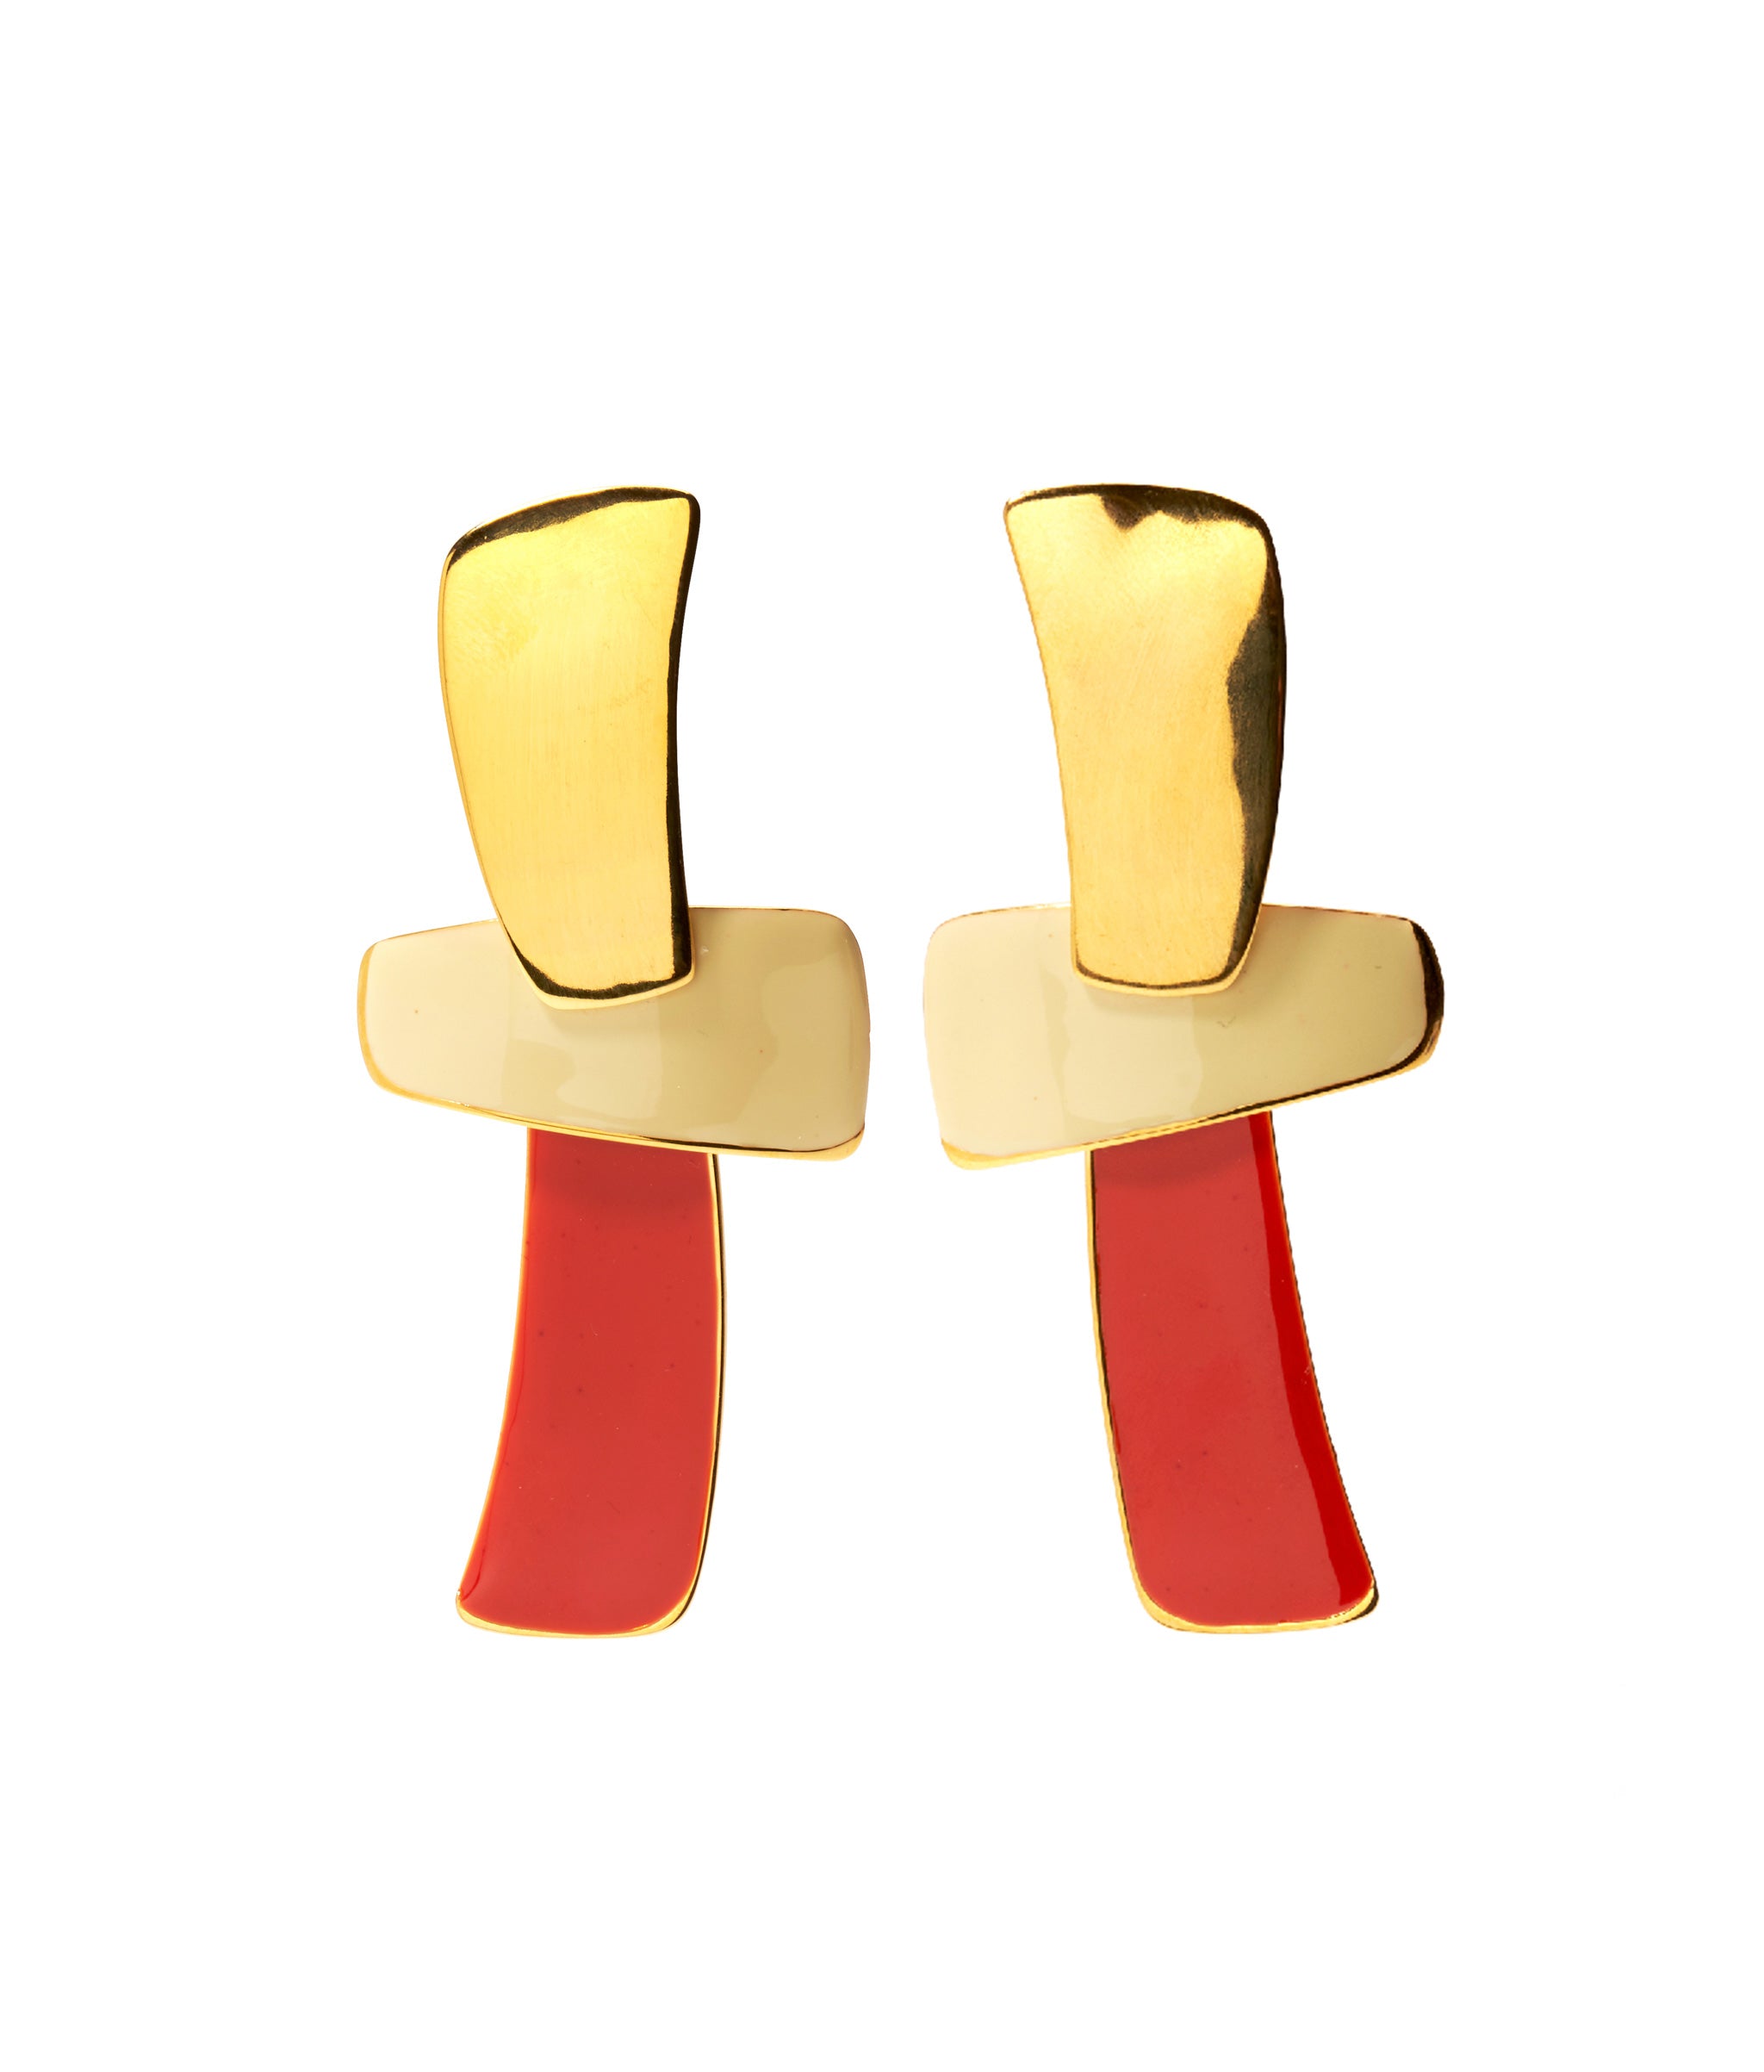 Ernesto Earrings in Red Hot. Gold-plated brass painted with cream and tomato red enamel.